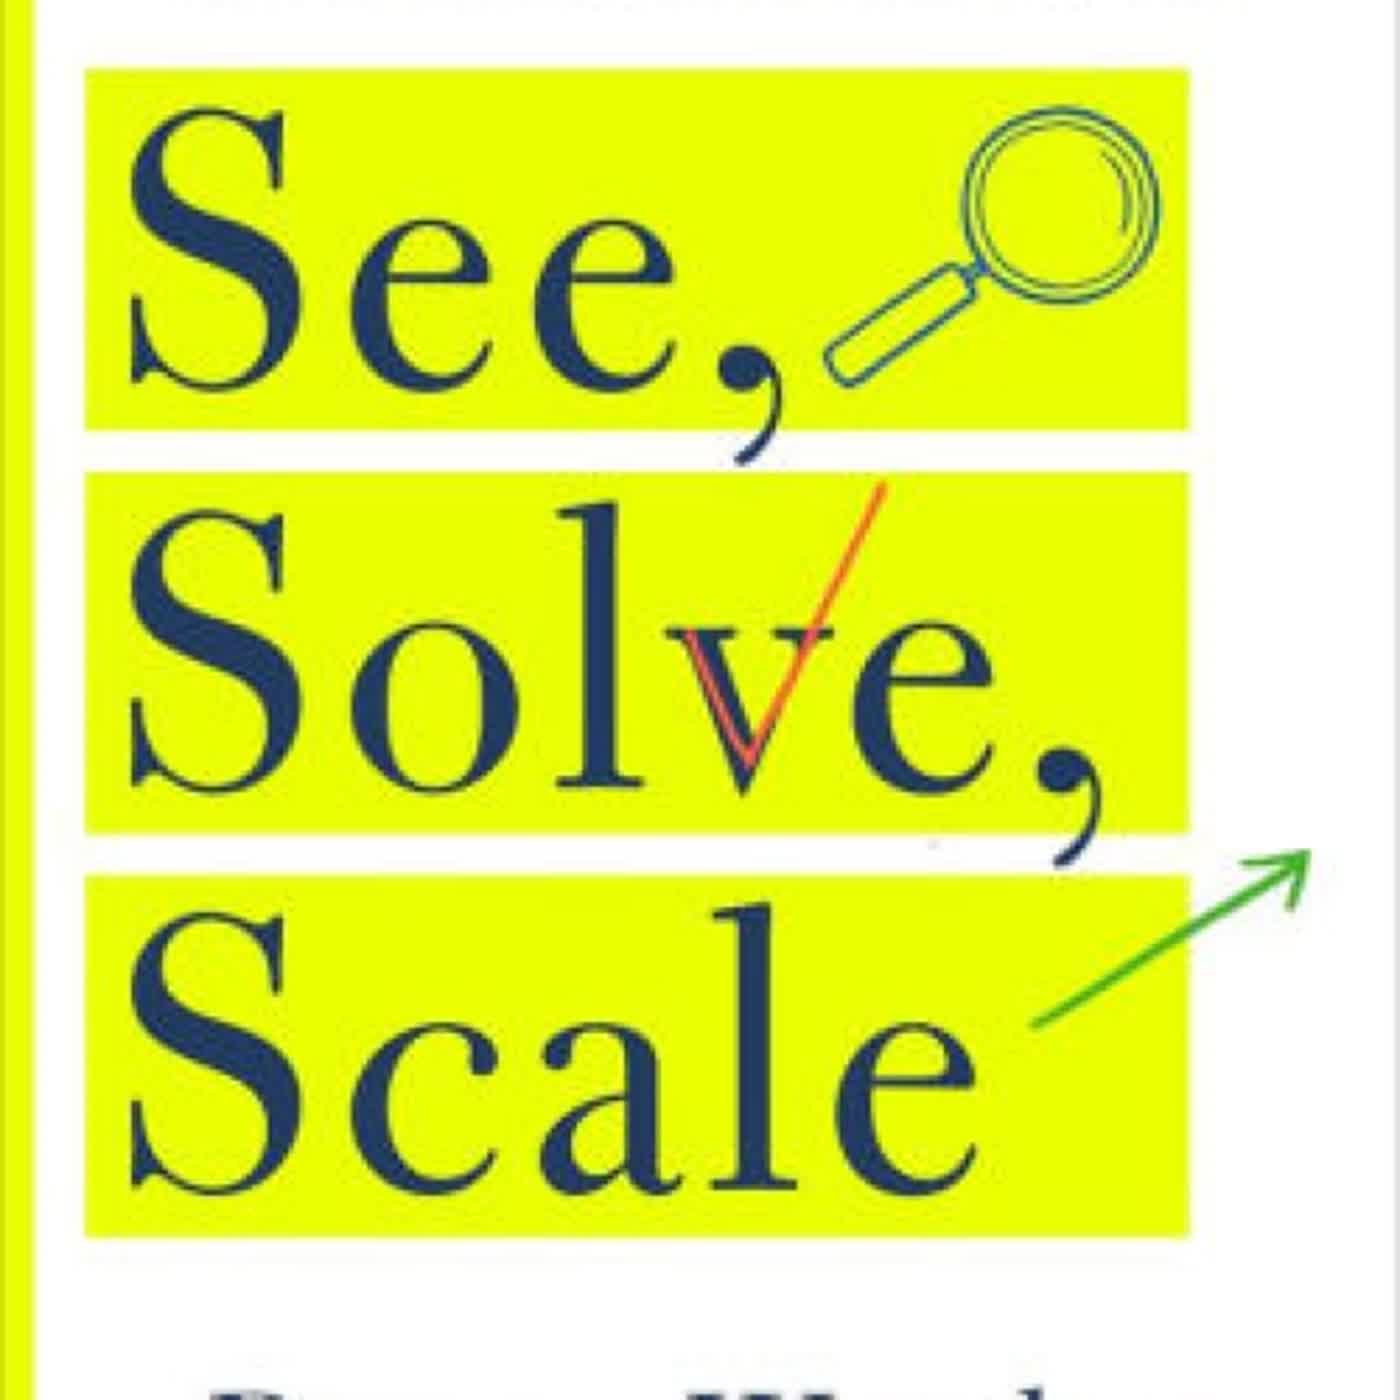 Read online: See, Solve, Scale: How Anyone Can Turn an Unsolved Problem into a Breakthrough Success by Danny Warshay